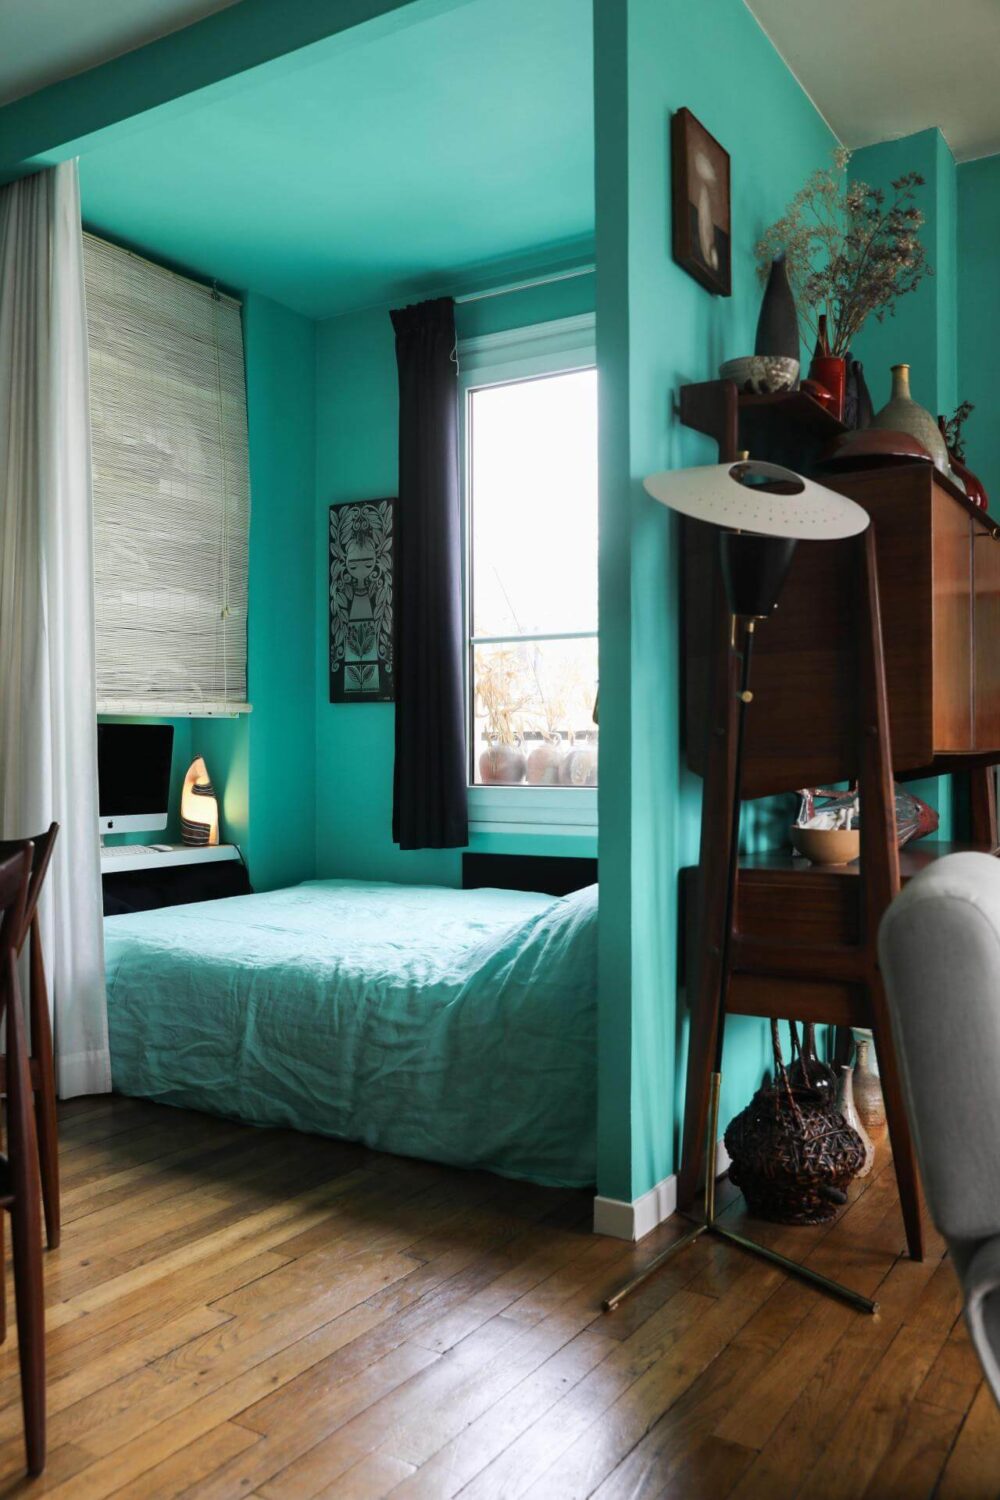 small bedroom green sponge benjamin moore nordroom Best Paint Colors for a Colorful Small Bedroom